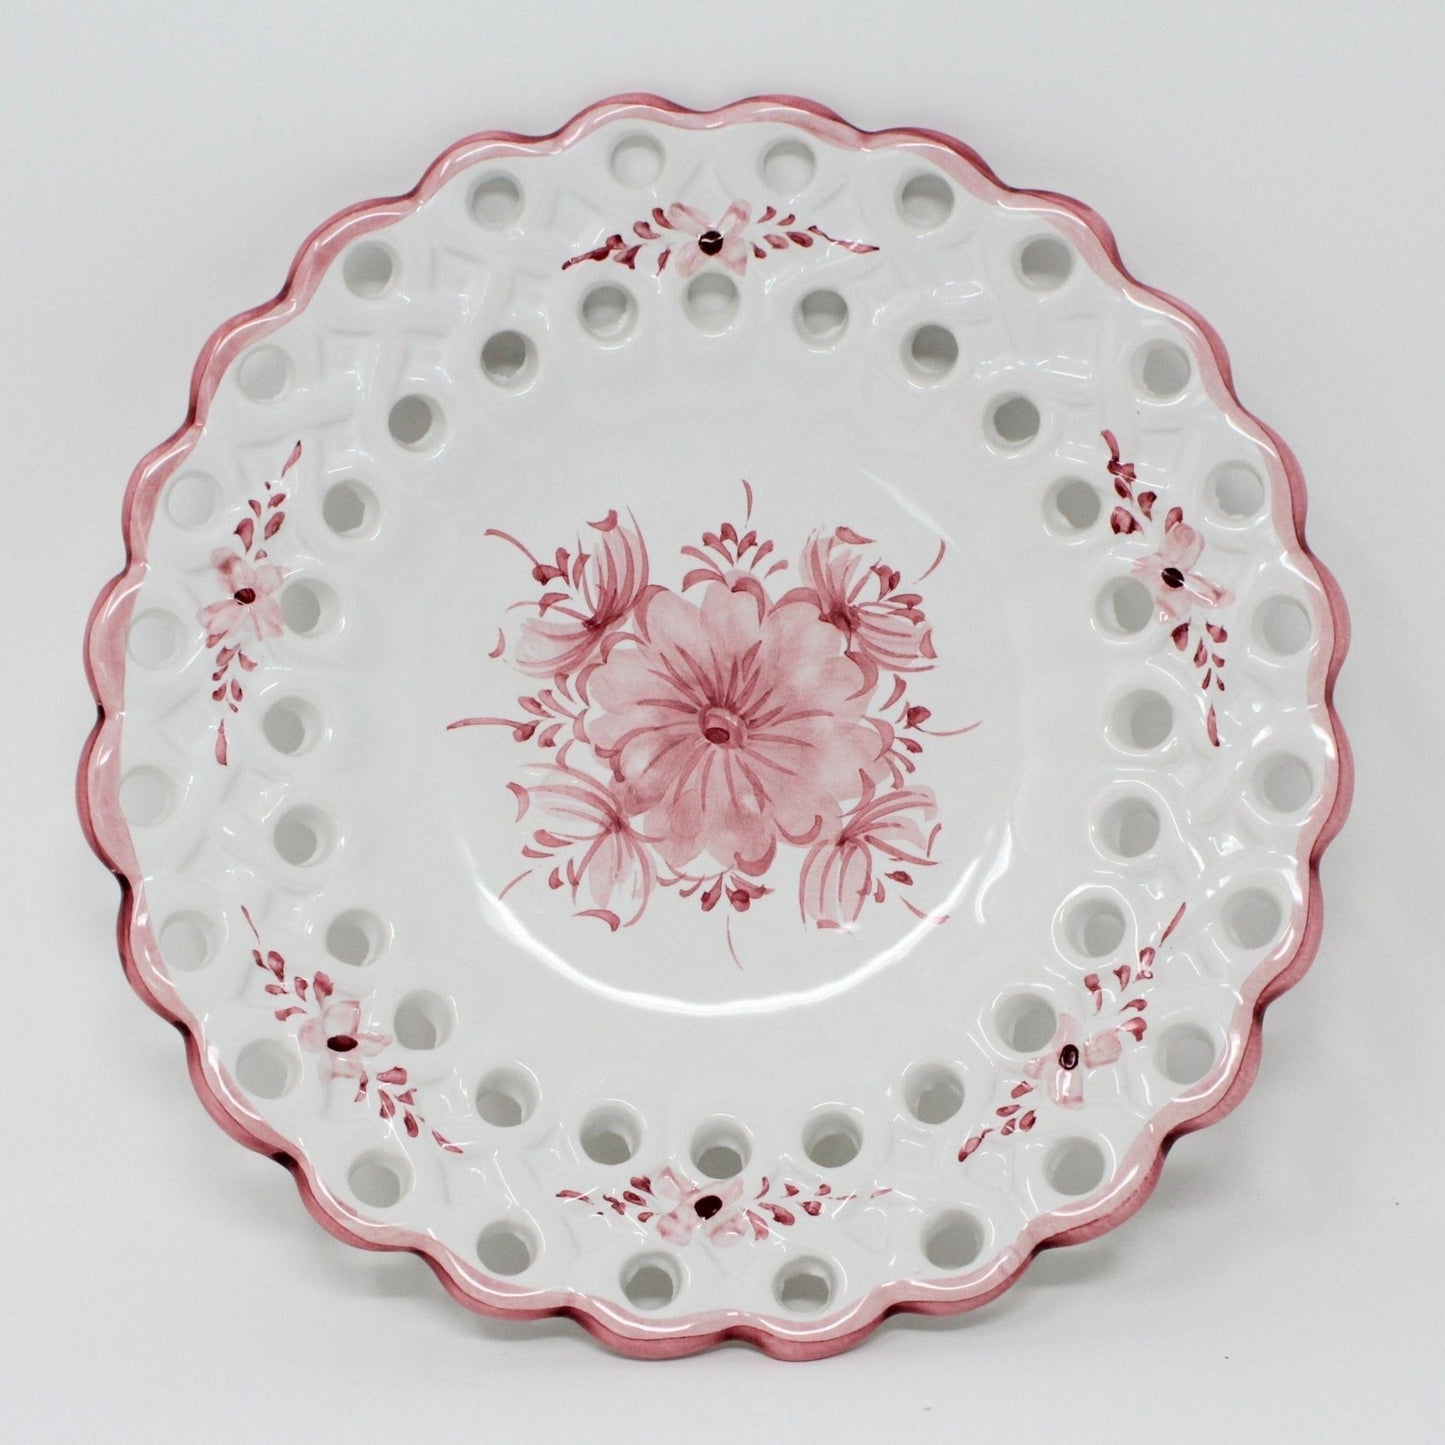 Decorative Plates, Hand Painted Portugal Pink Flowers, Reticulated, Set of 4, Vintage